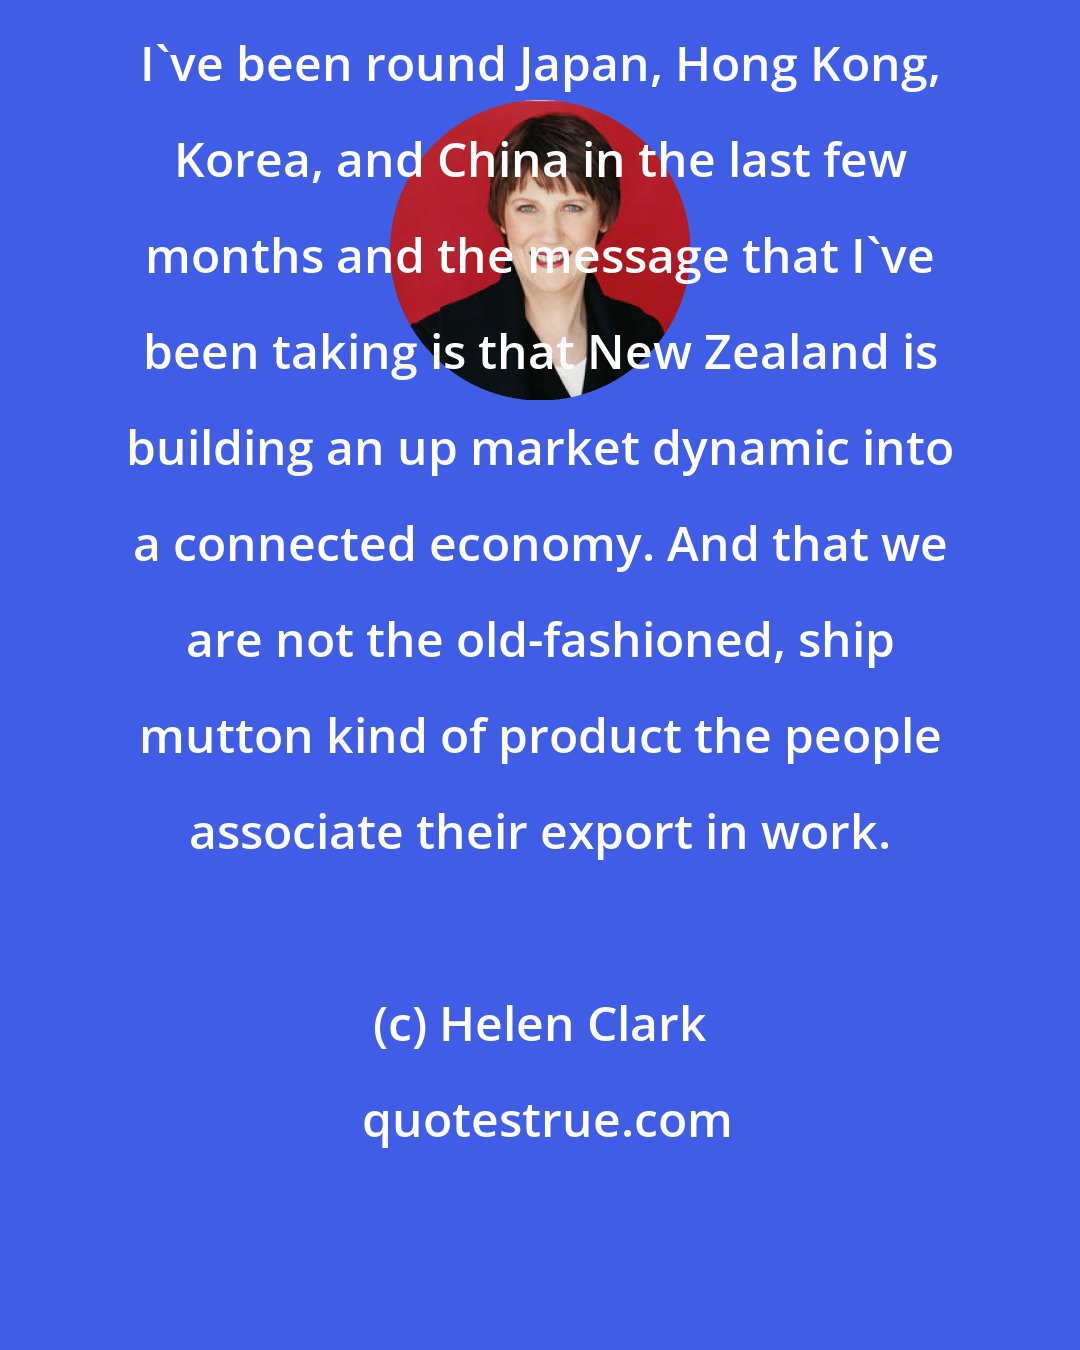 Helen Clark: I've been round Japan, Hong Kong, Korea, and China in the last few months and the message that I've been taking is that New Zealand is building an up market dynamic into a connected economy. And that we are not the old-fashioned, ship mutton kind of product the people associate their export in work.